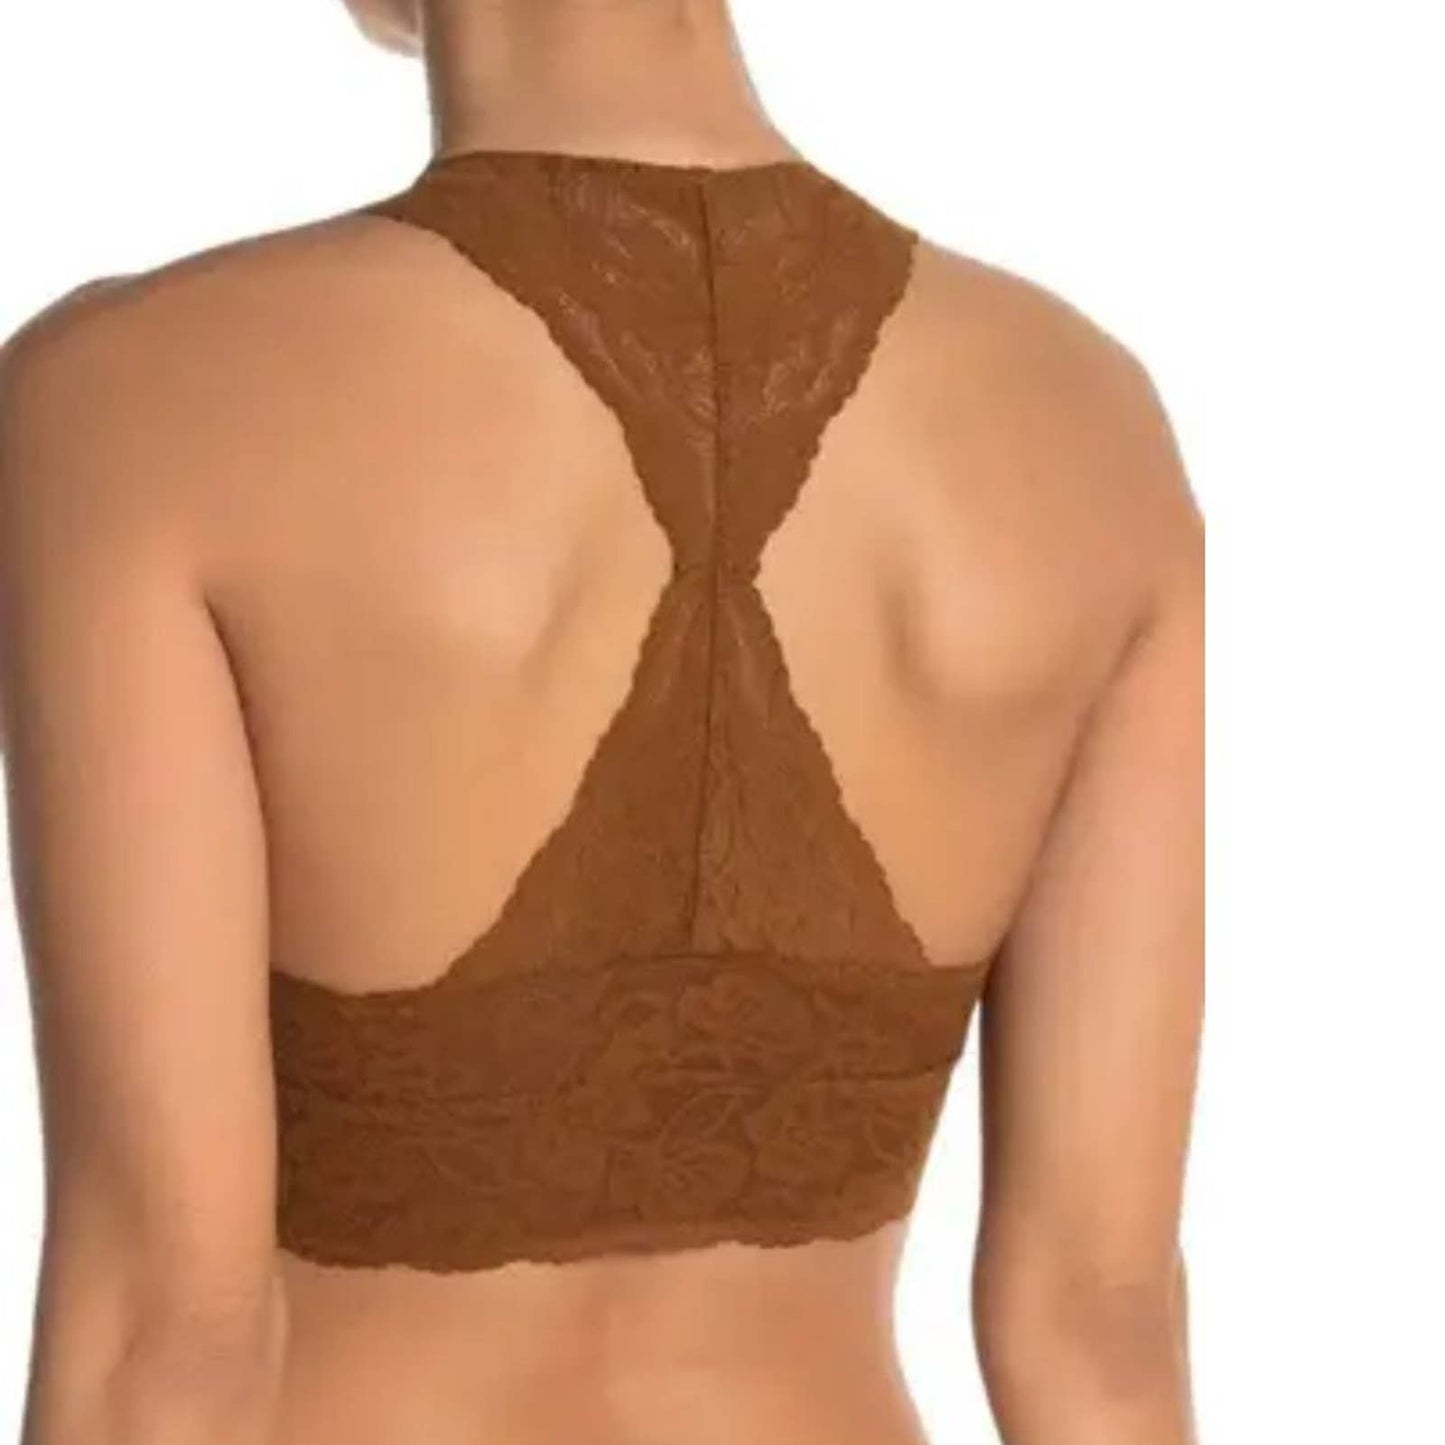 Free People Galloon Lace Racerback Bra in Copper Tan NWT Brand New